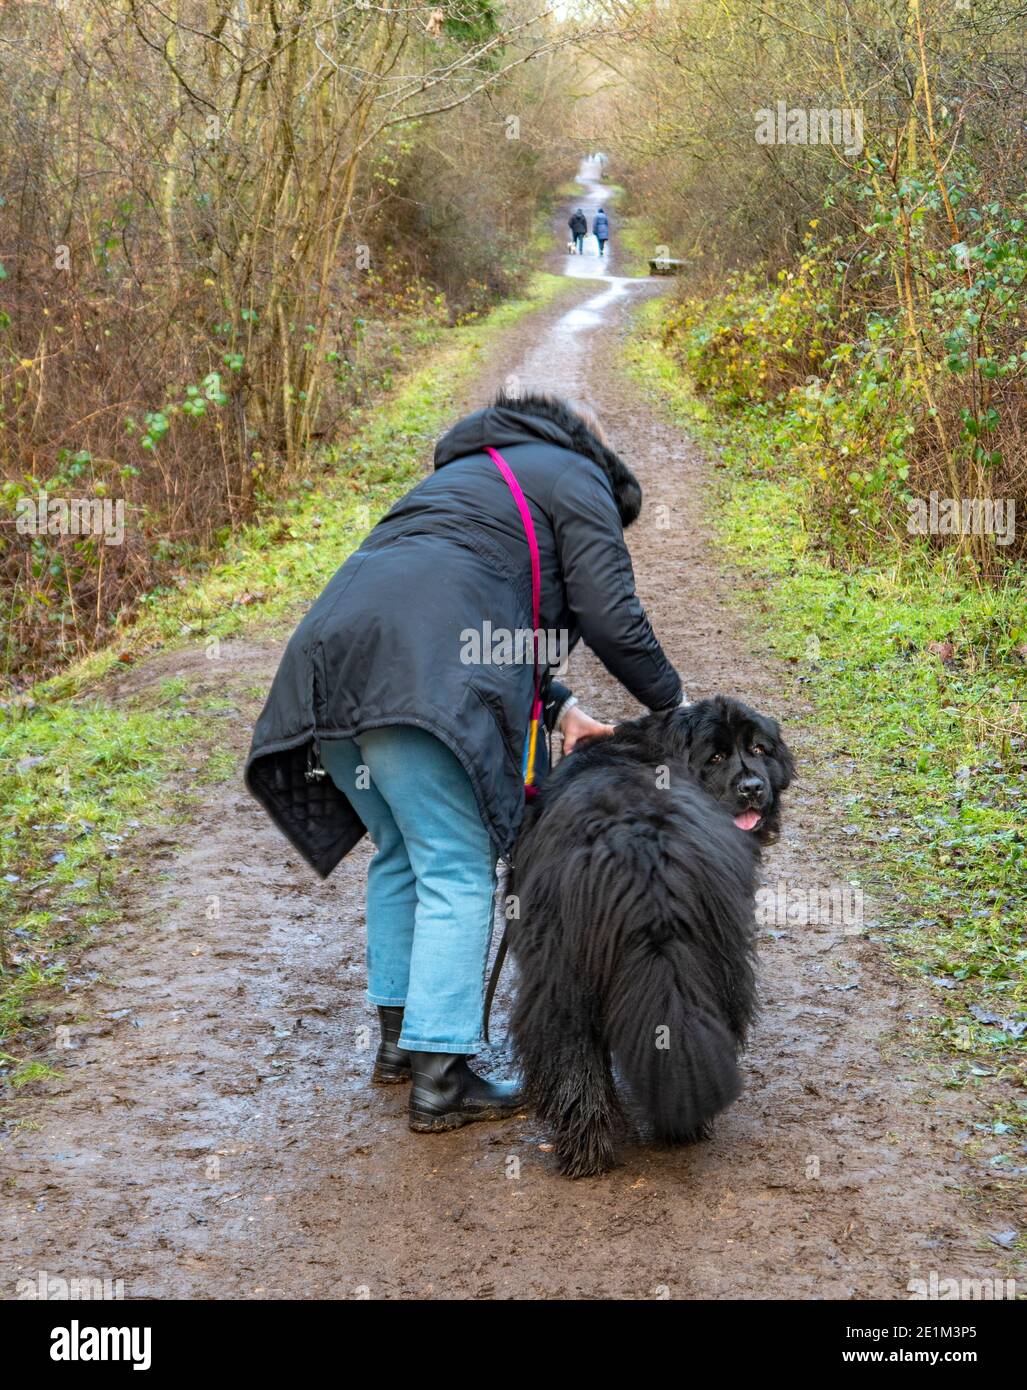 A woman preparing to walk her black adult Newfoundland dog on a muddy path / track / trail in woods in winter, with other dog walkers ahead. Stock Photo